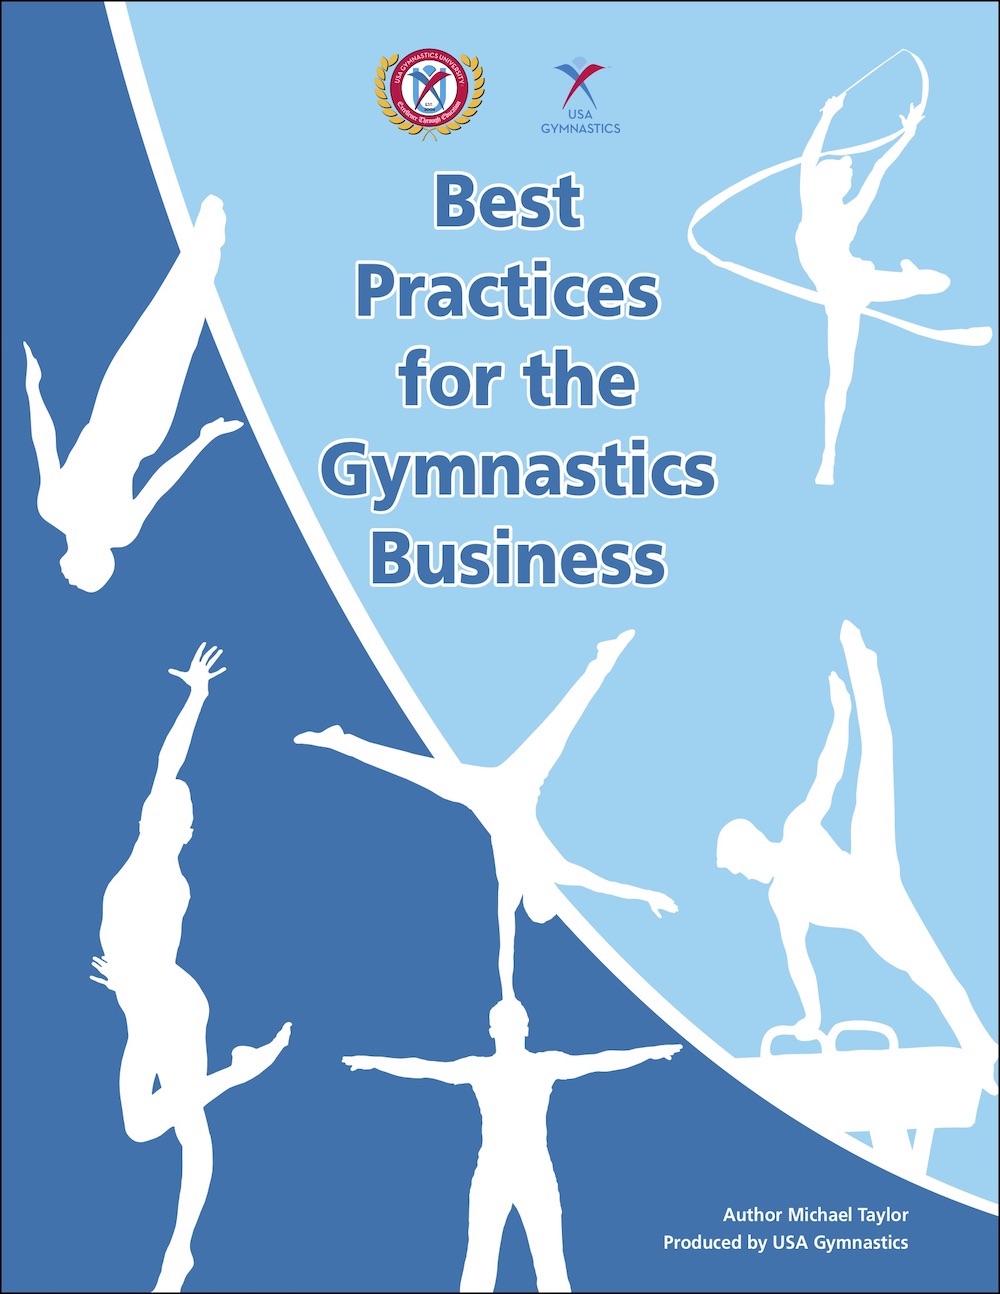 usag-best-practices-for-the-gymnastics-business.jpg